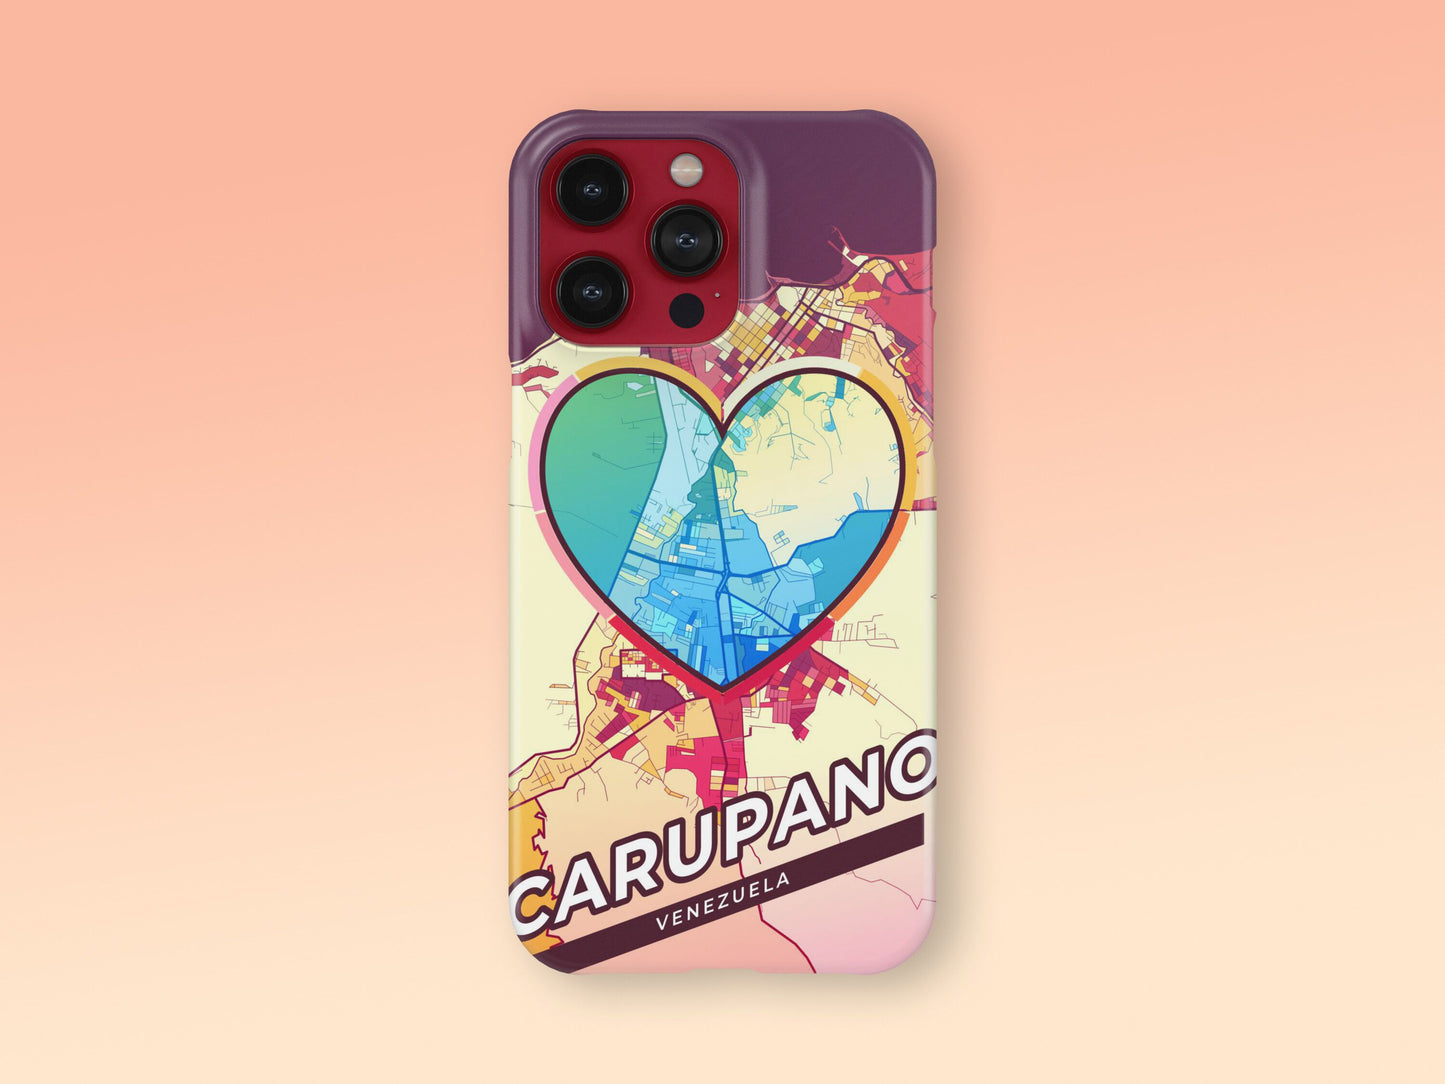 Carupano Venezuela slim phone case with colorful icon. Birthday, wedding or housewarming gift. Couple match cases. 2